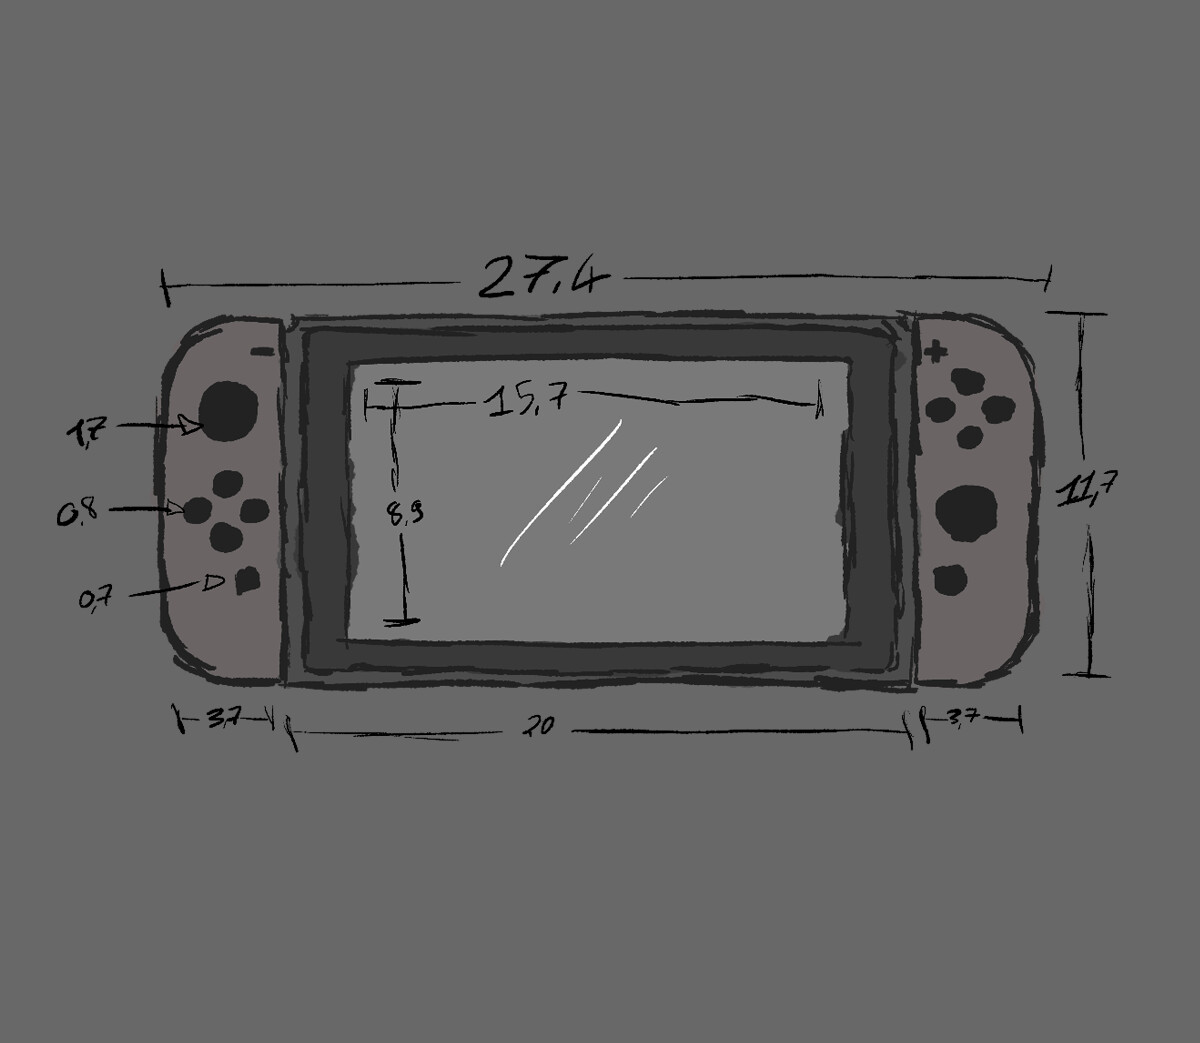 i did a drawing of a Nintendo switch : r/NintendoSwitch